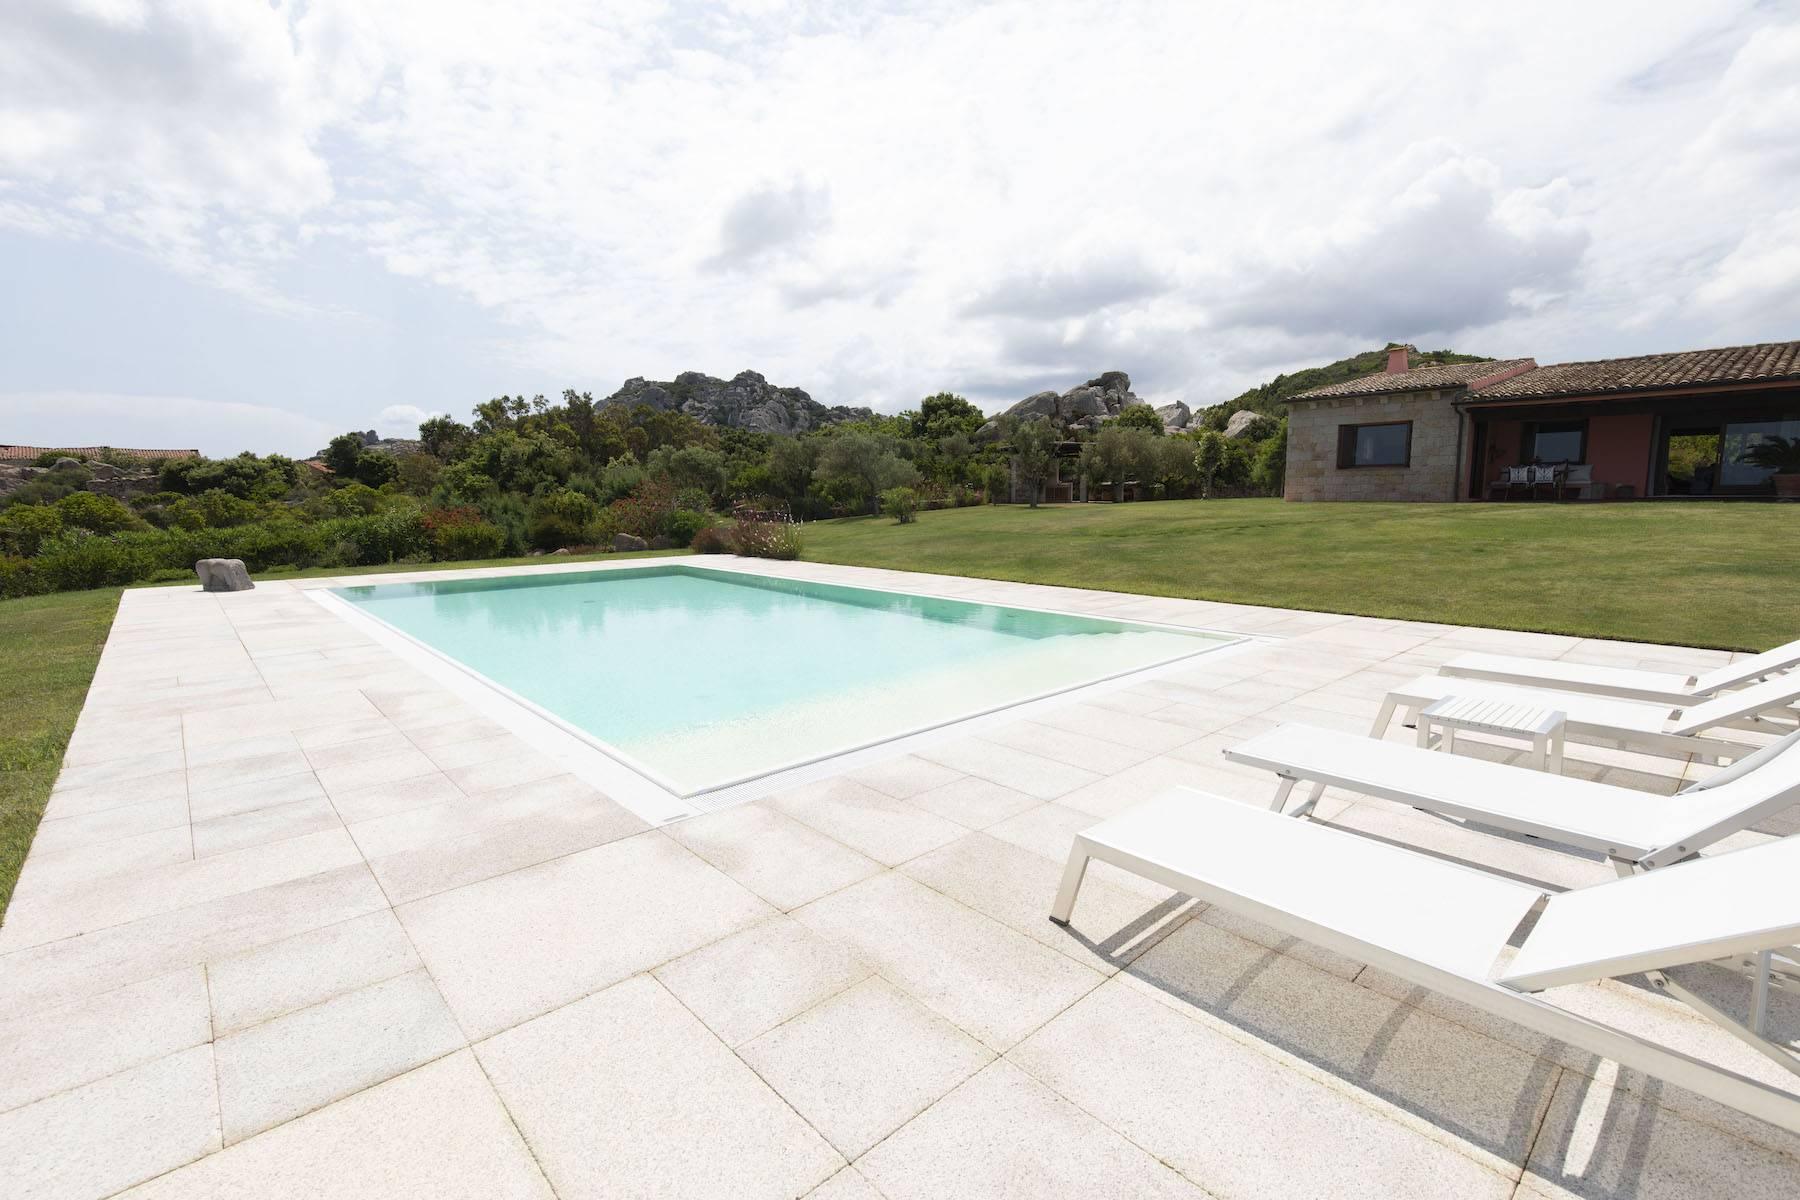 Incredible property of 3 hectares, just a few kilometers from the Costa Smeralda - 20